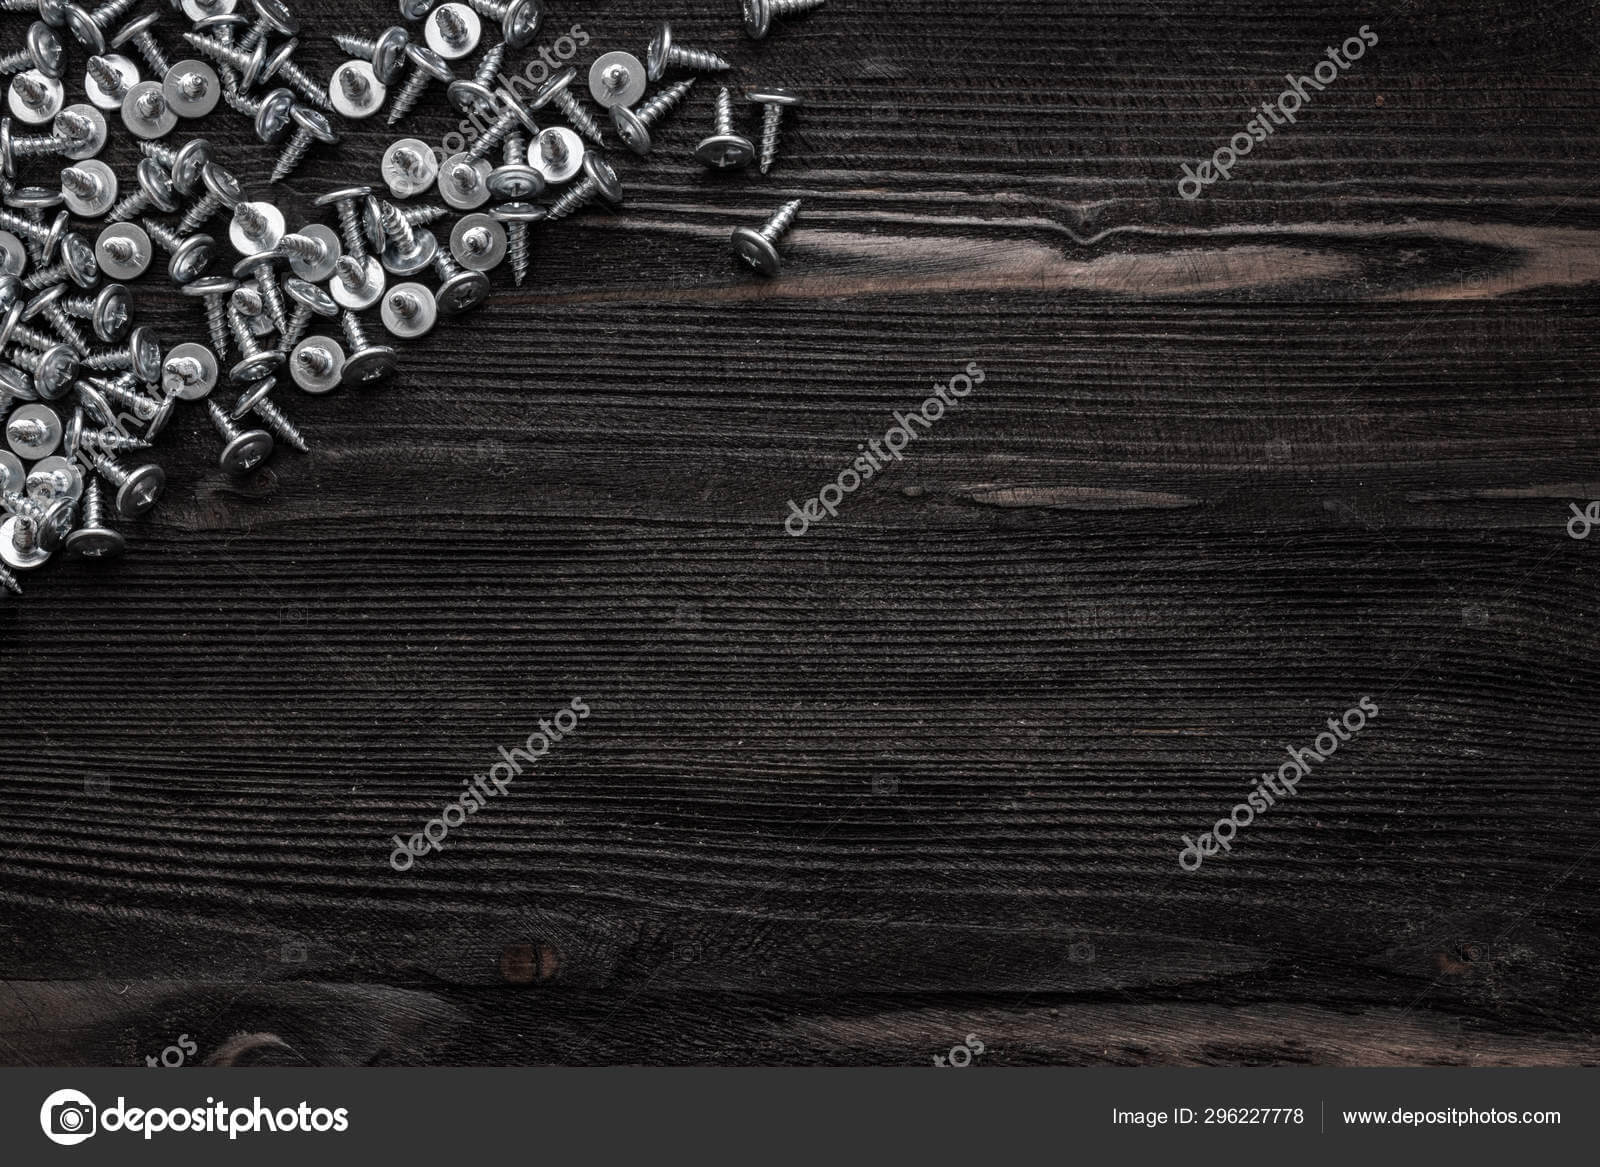 Some Wood Crews On Dark Wooden Desk Board Surface. Top View Inside Borderless Certificate Templates